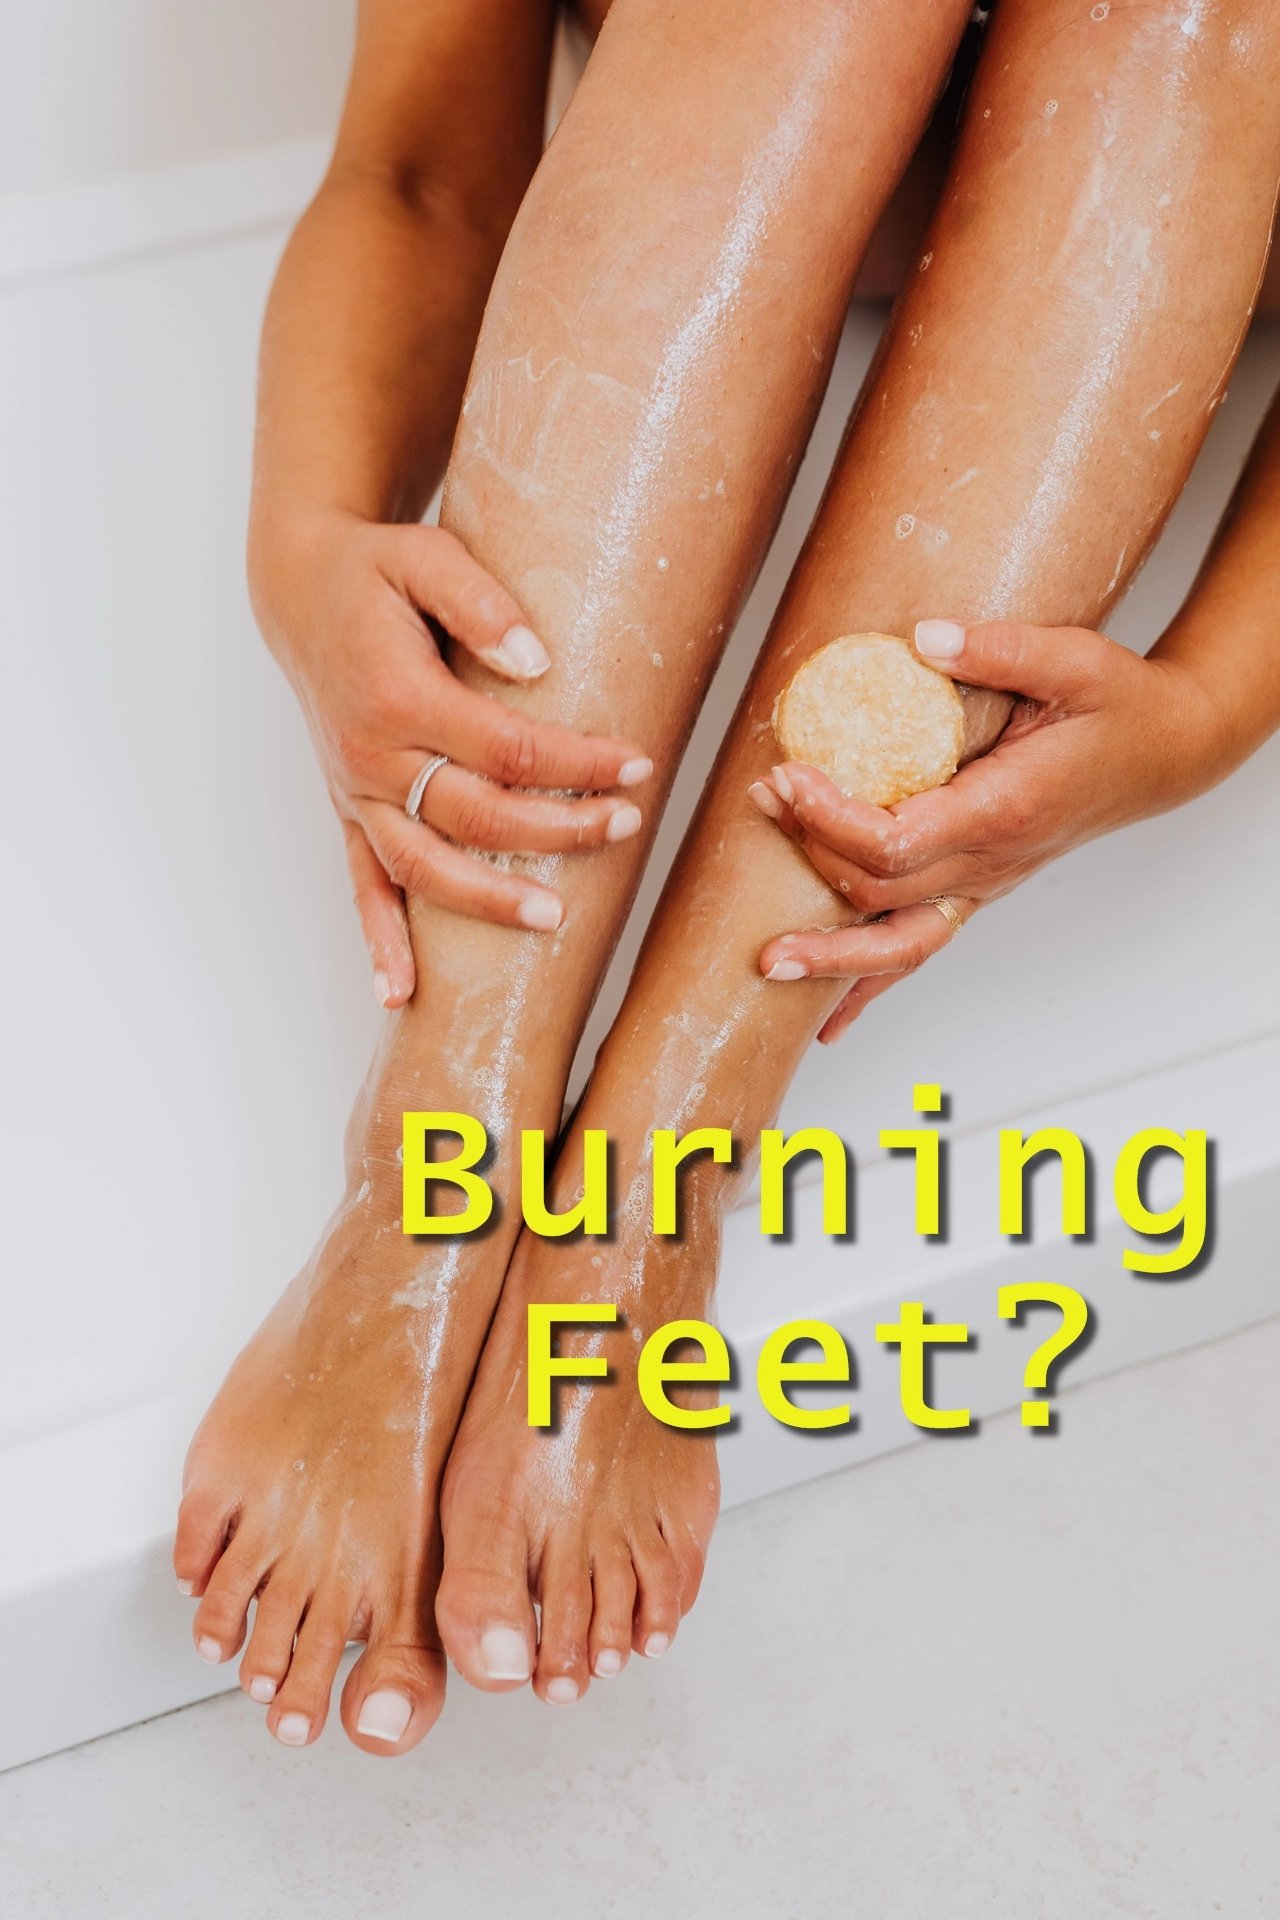 Which Doctor to Consult for Burning Feet